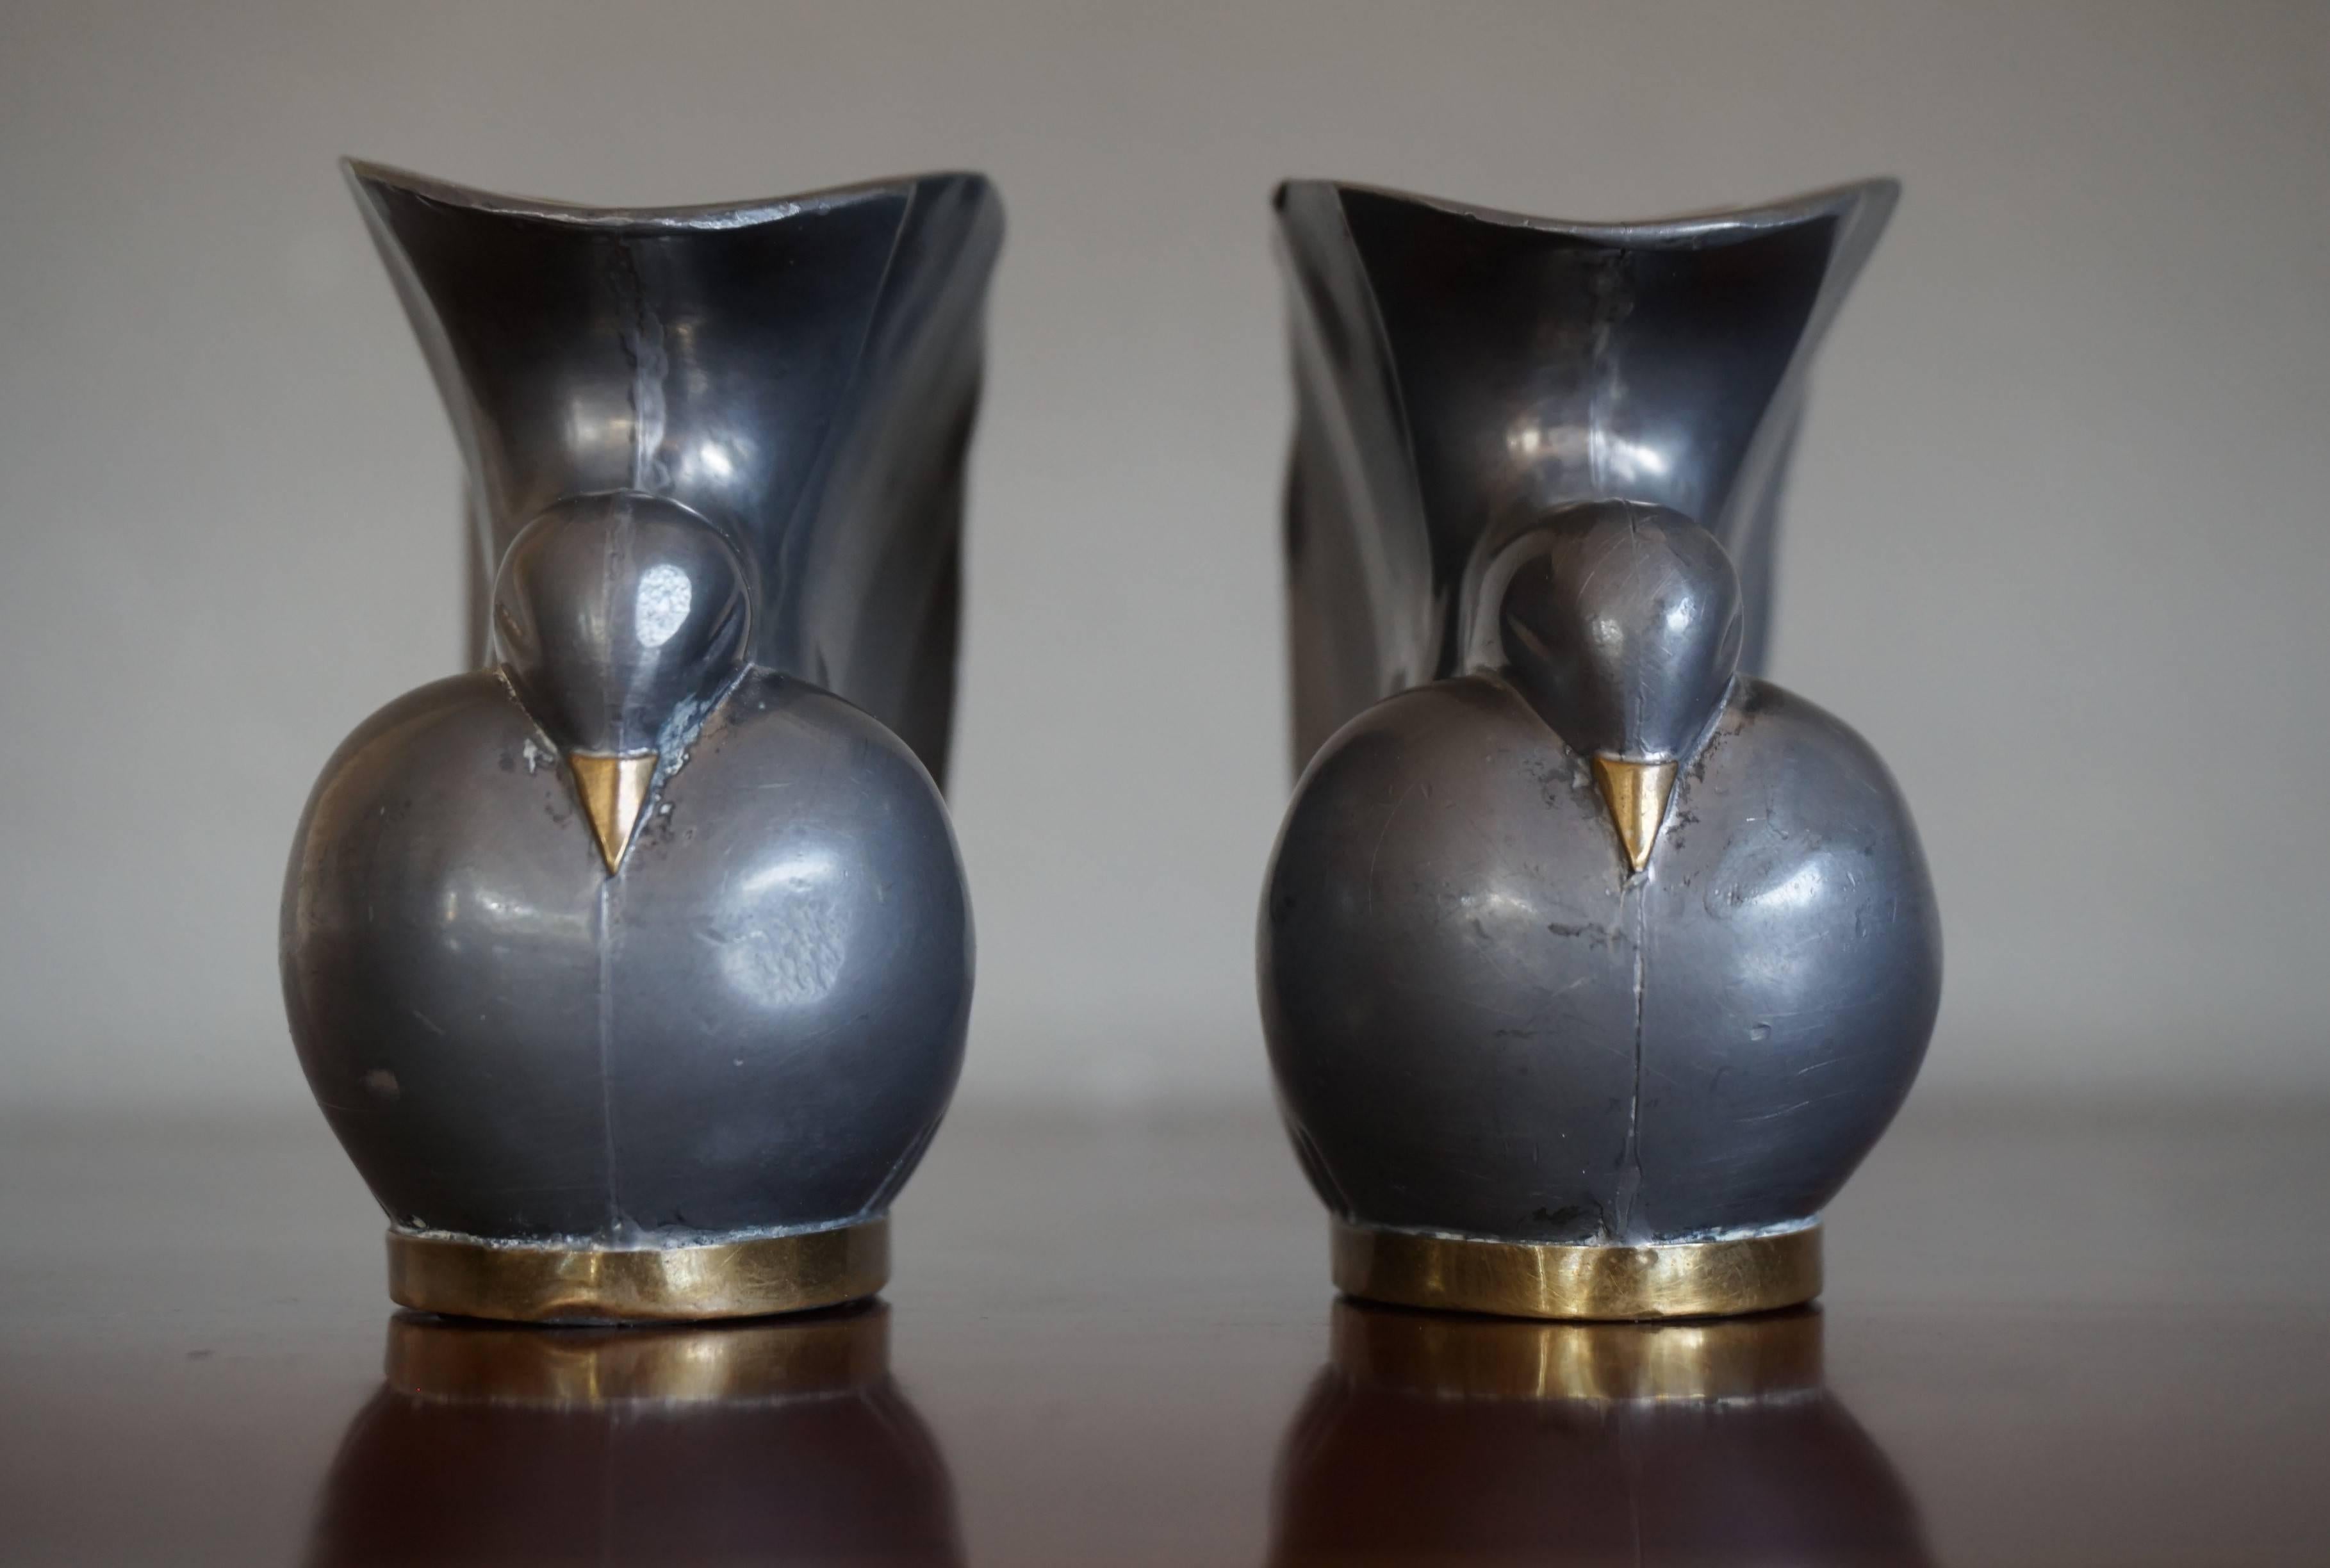 Hand-Crafted Pair of Stylized 1920s Art Deco Pigeon / Doves Candleholders of Pewter and Brass